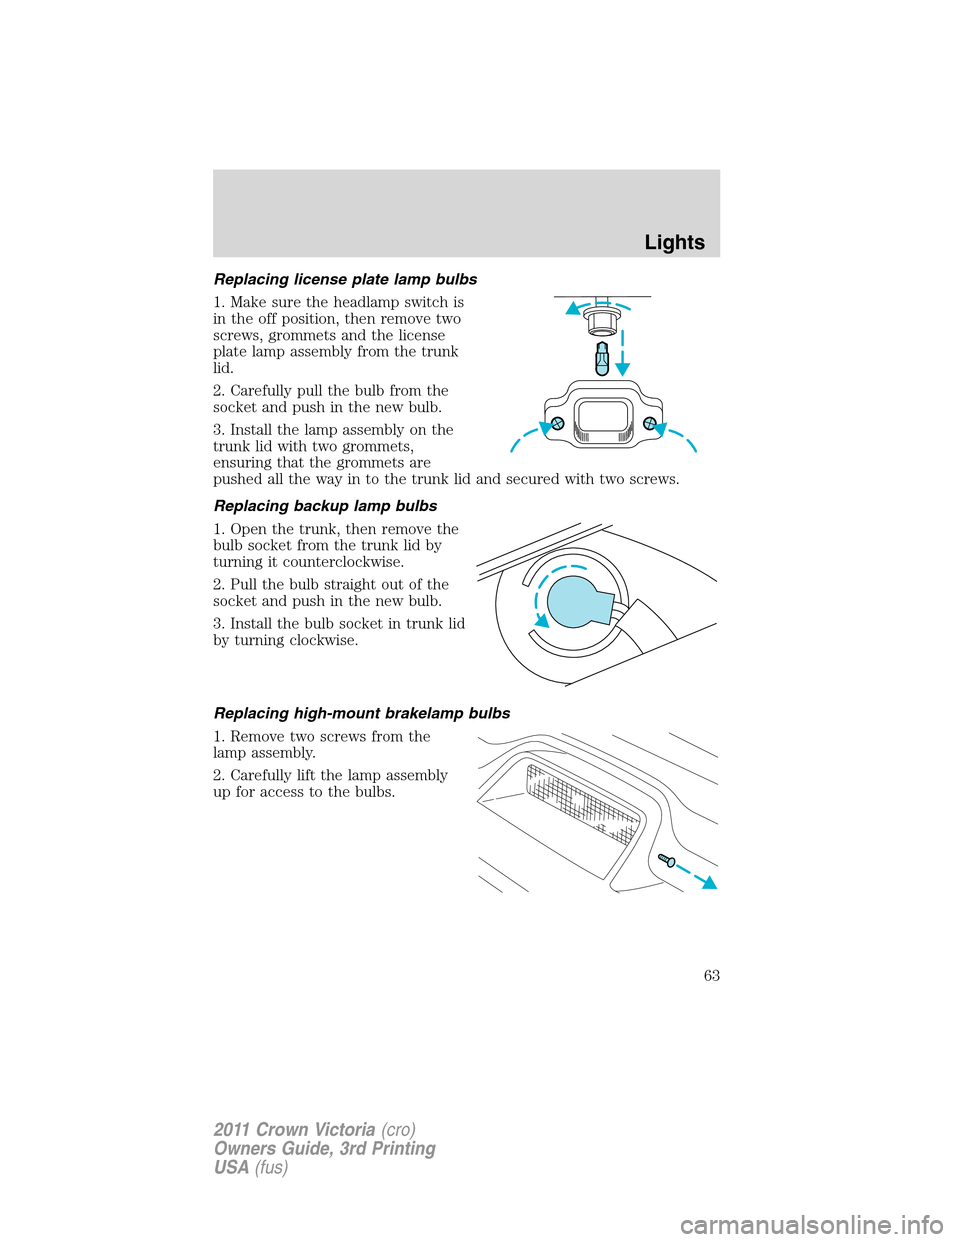 FORD CROWN VICTORIA 2011 2.G User Guide Replacing license plate lamp bulbs
1. Make sure the headlamp switch is
in the off position, then remove two
screws, grommets and the license
plate lamp assembly from the trunk
lid.
2. Carefully pull t